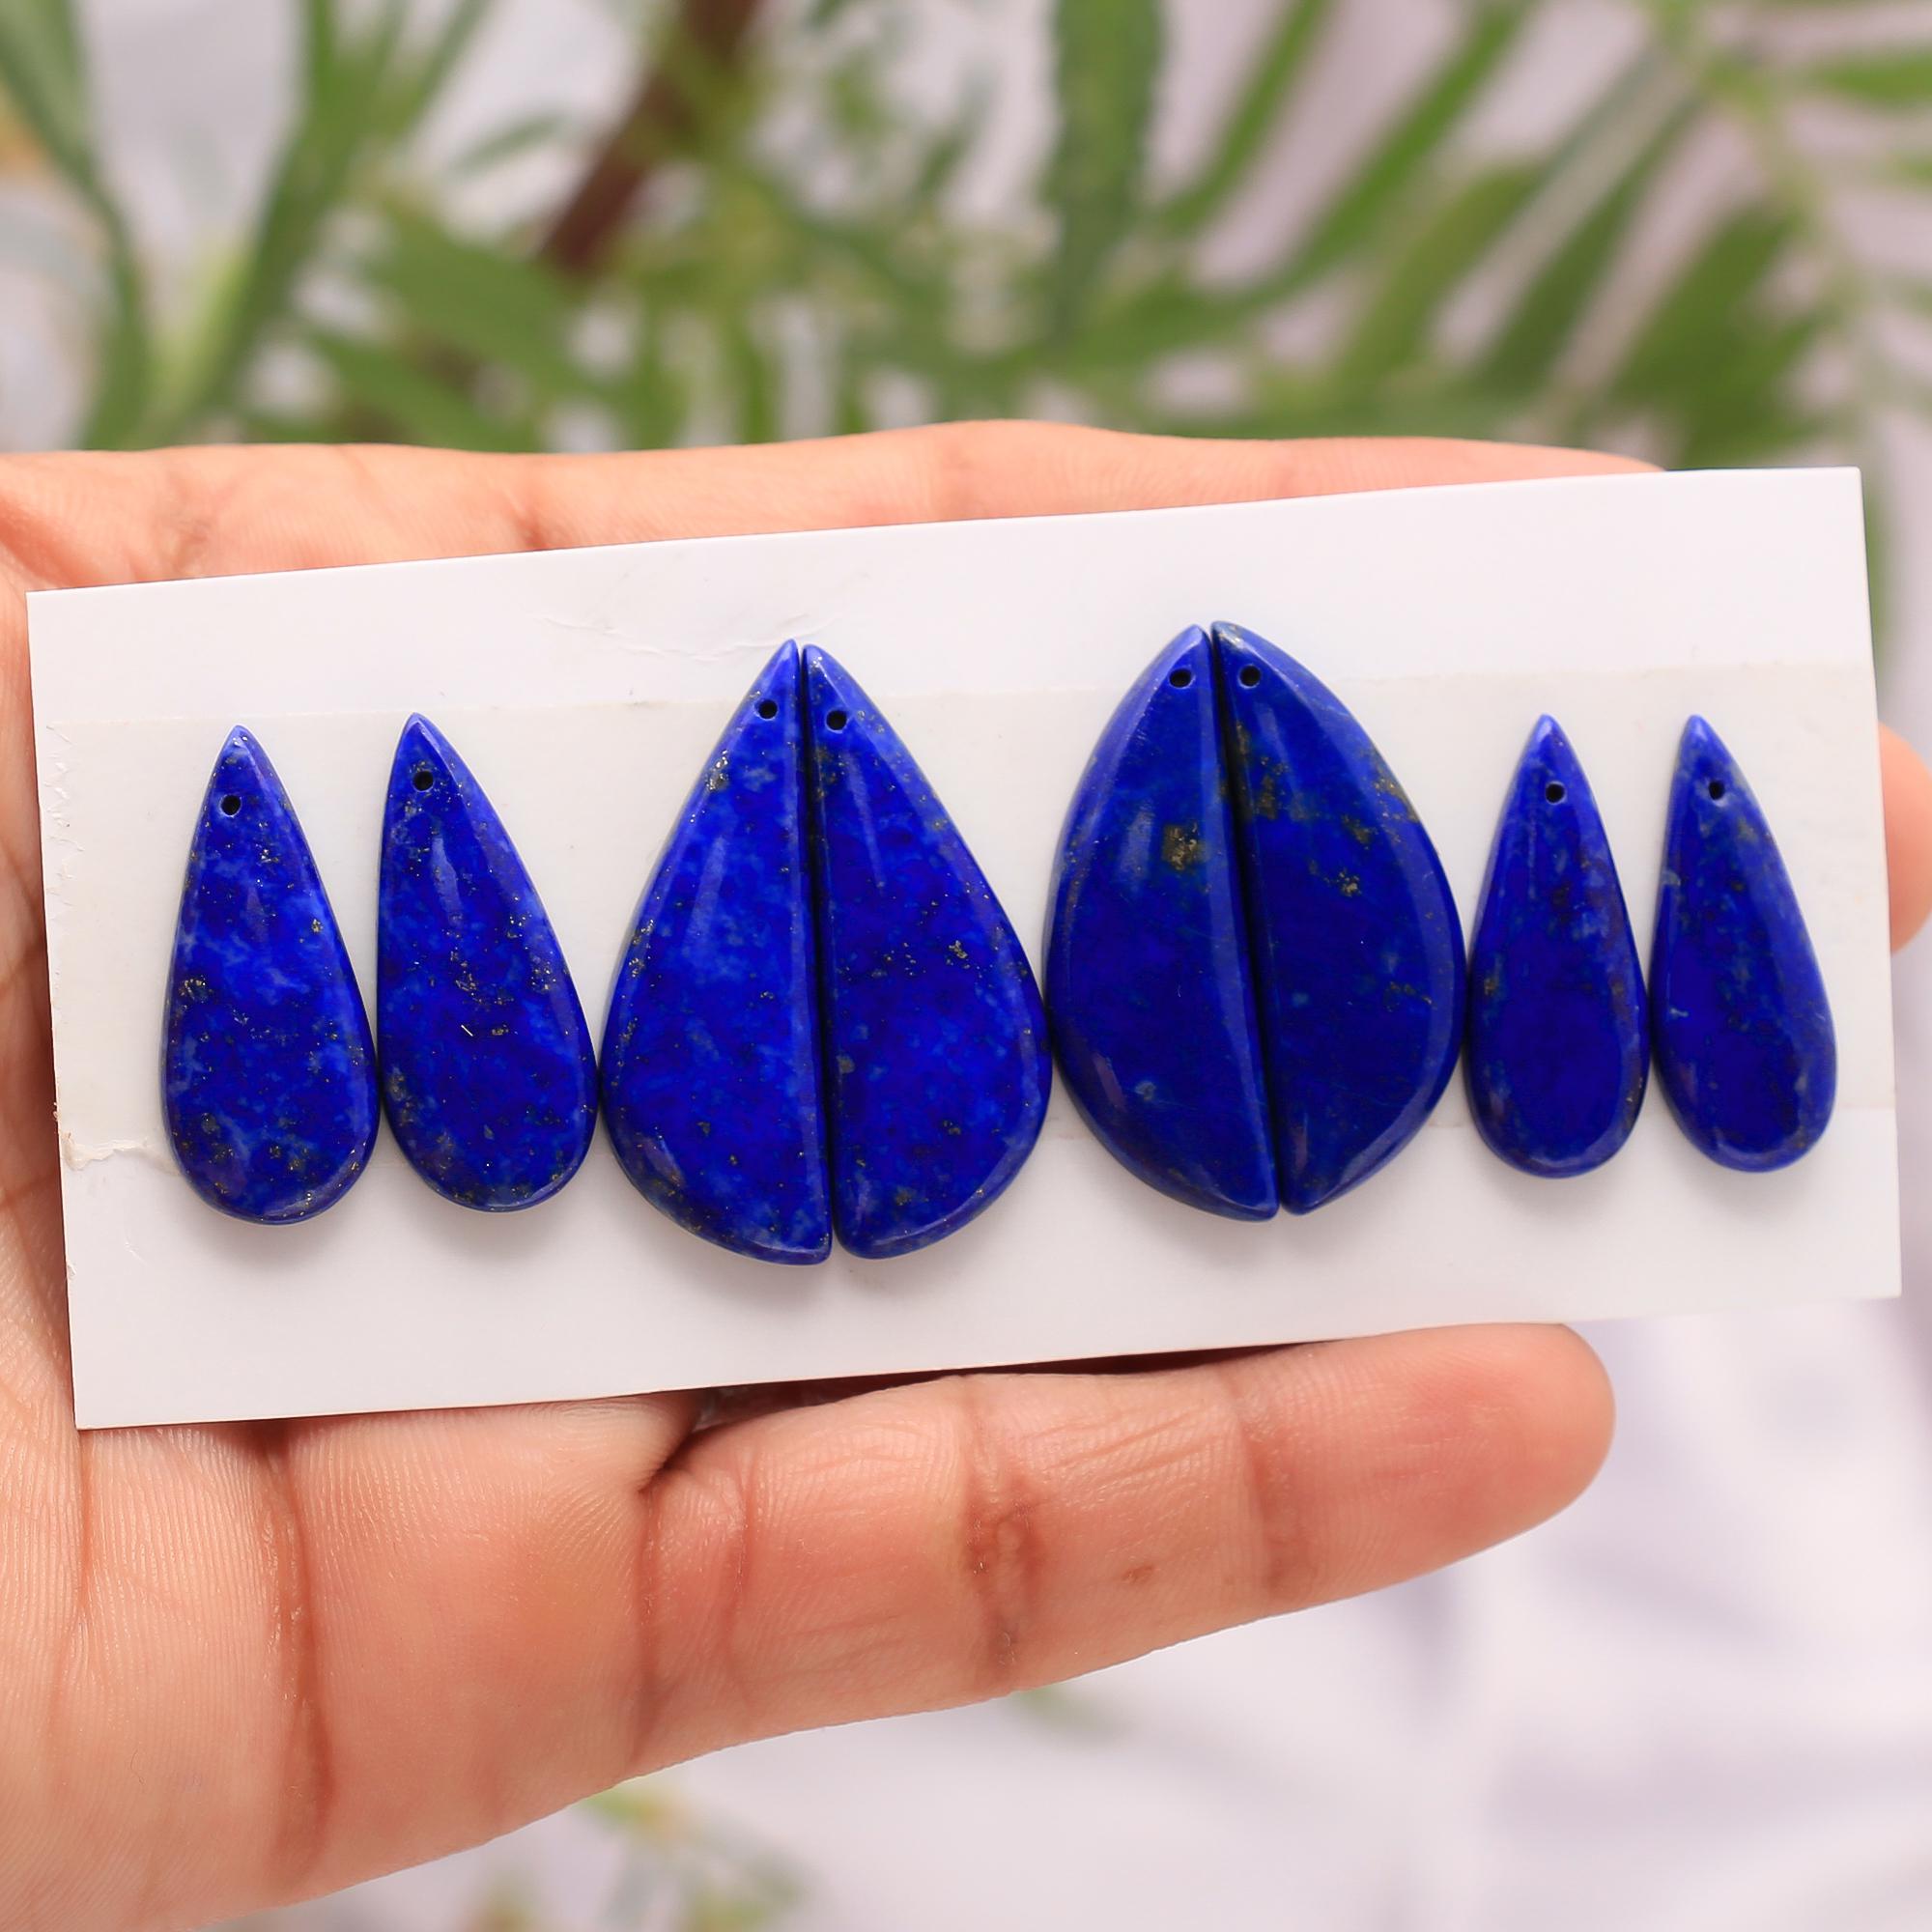 4 Pair 84Cts Natural Lapis Lazuli Front To Back Drilled Earring Mix Pairs Cabochon Loose Gemstone Lot Size 31x11 24x10 mm